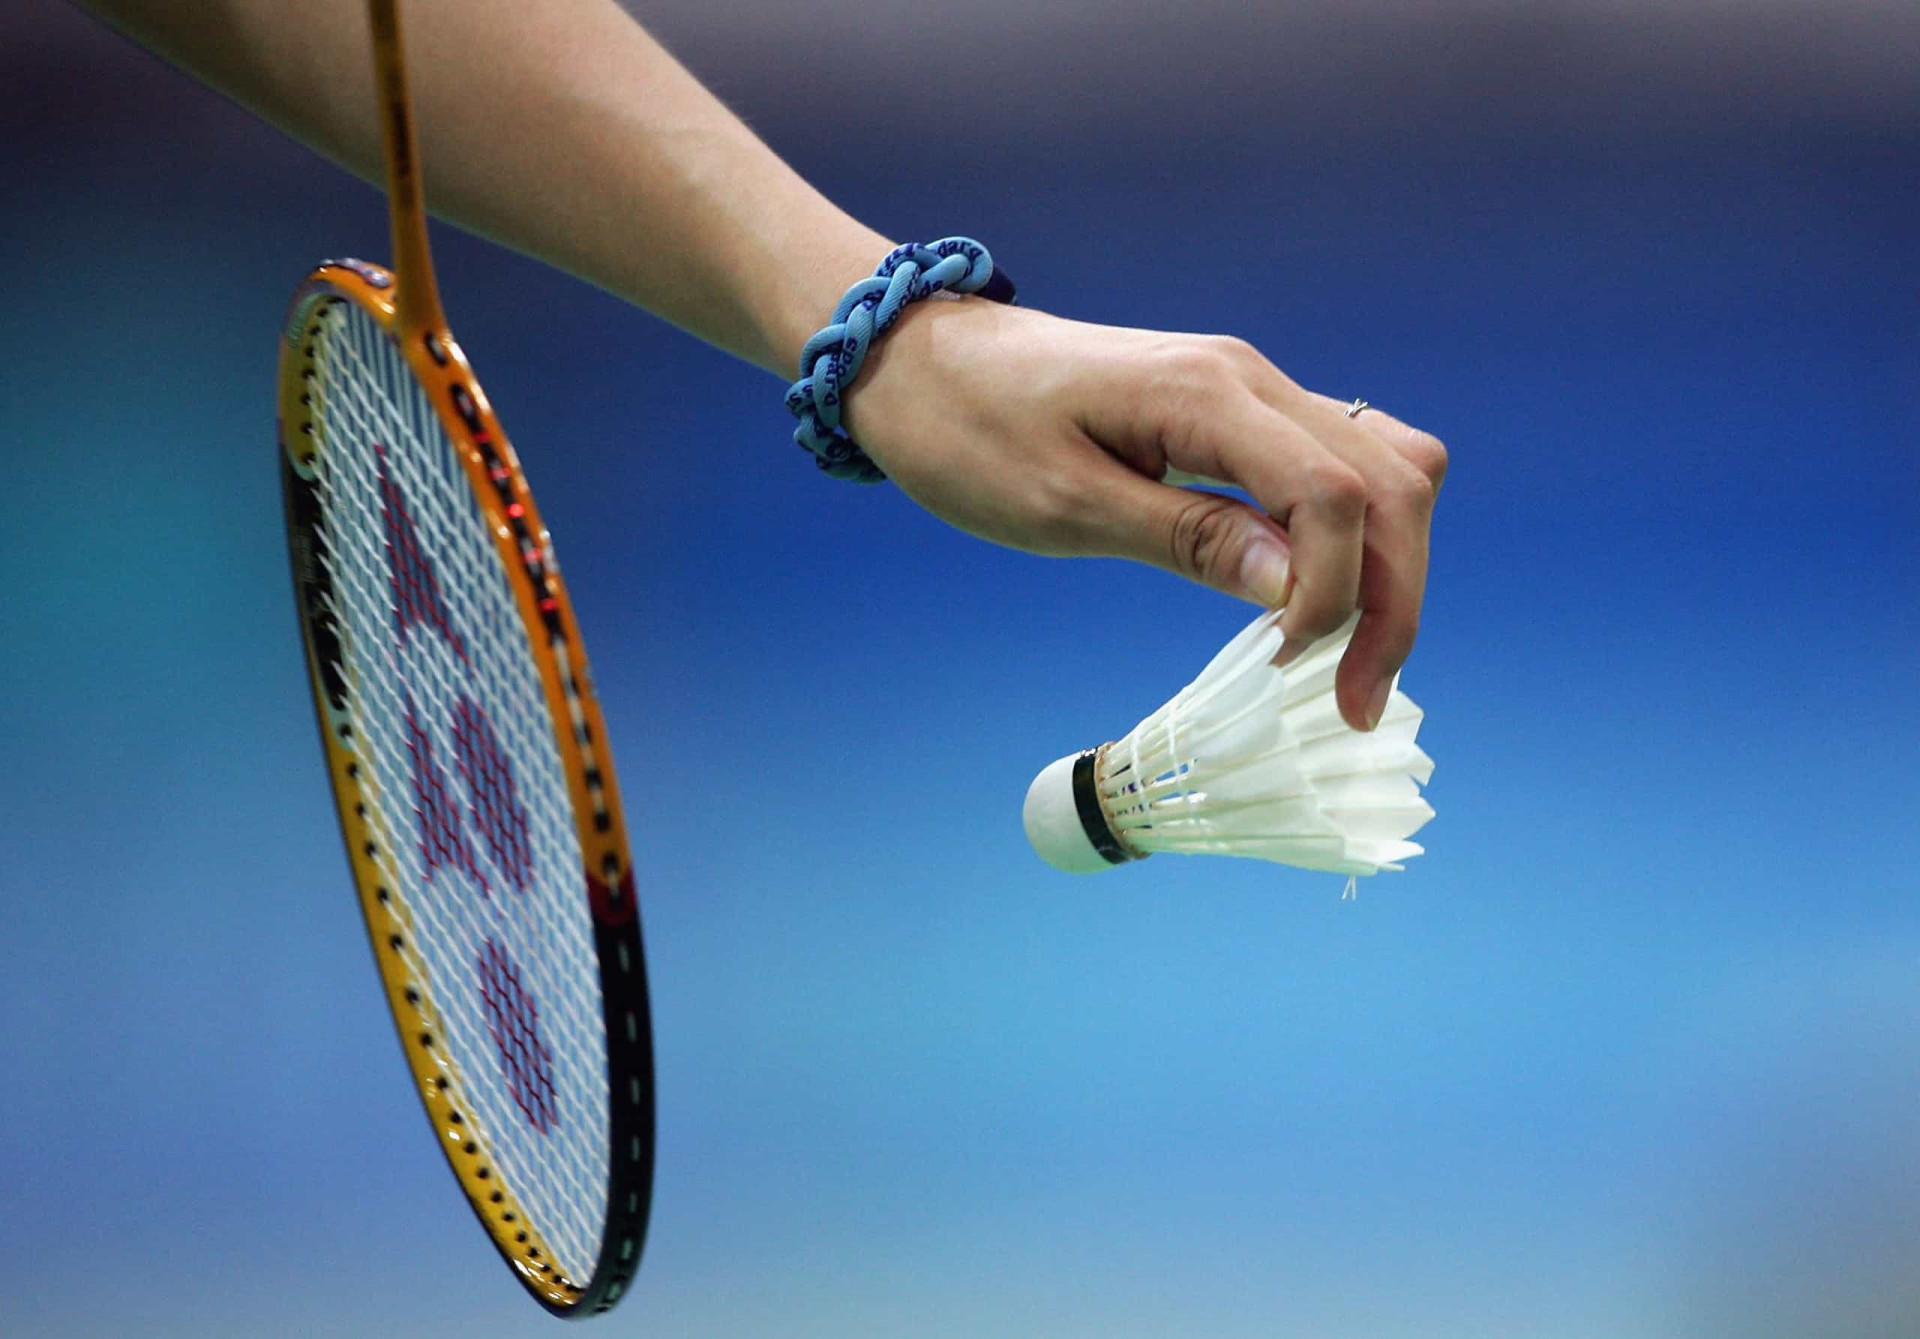 <div>While the roots of the sport can be traced to ancient Greece, the game of badminton in fact originated in Siam, China, over 2,000 years ago. It was introduced to England in 1870, and was initially played somewhat like tennis.</div><p><a href="https://www.msn.com/en-ph/community/channel/vid-7xx8mnucu55yw63we9va2gwr7uihbxwc68fxqp25x6tg4ftibpra?cvid=94631541bc0f4f89bfd59158d696ad7e">Follow us and access great exclusive content every day</a></p>